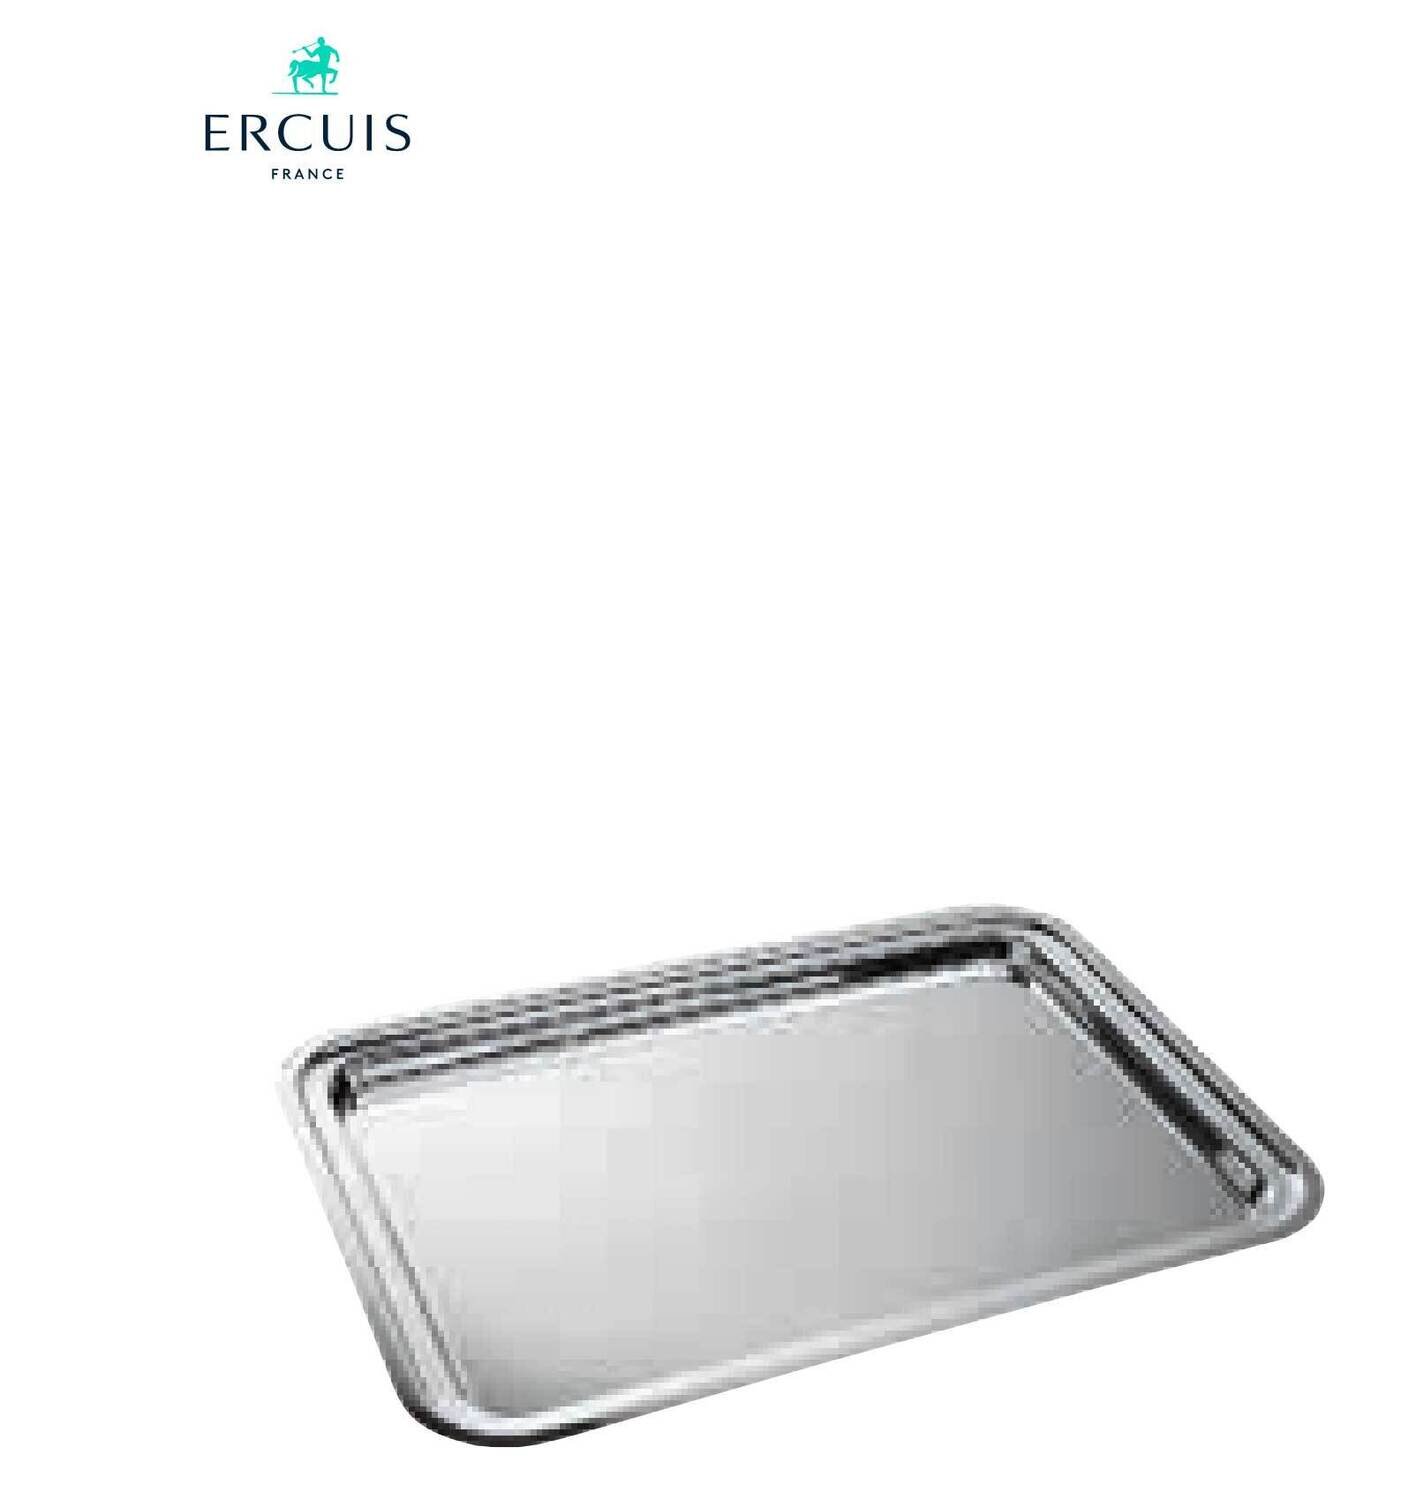 Ercuis Classique Rectangular Serving Tray 13.75 x 11.75 Inch Silver Plated F530451-35